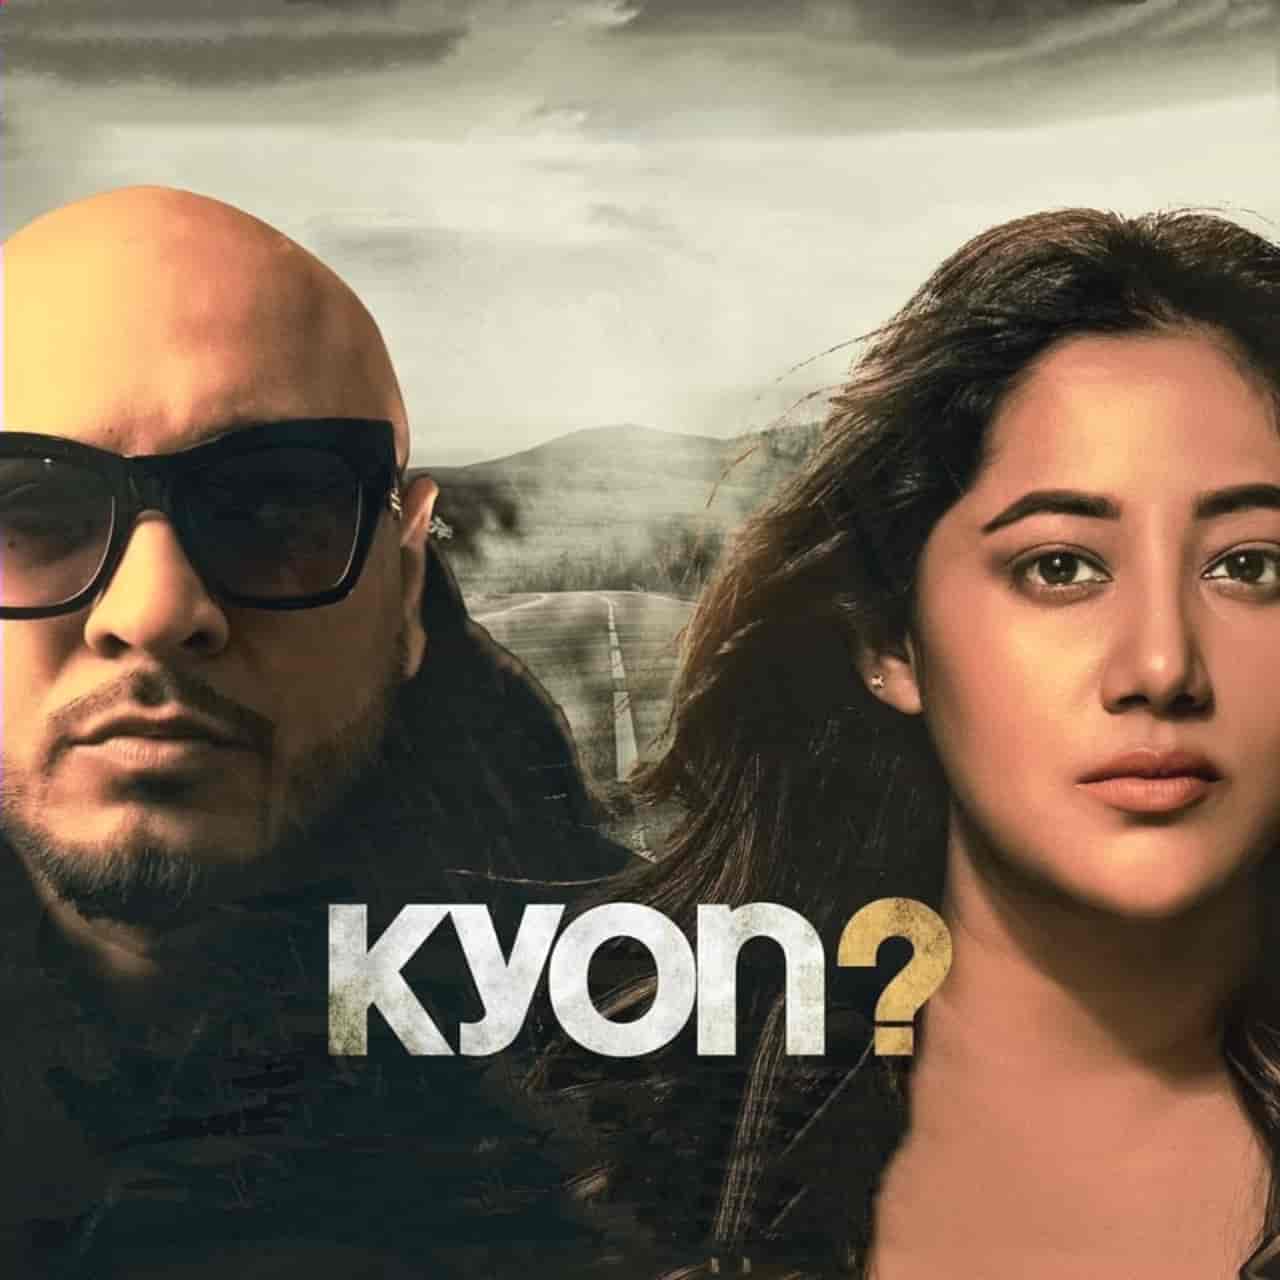 Kyon Lyrics :- Very beautiful sad hindi song which is titled "Kyon" has released. This beautiful song sung by B Praak and Payal Dev this thing add more beauty. Music of this song also given by Payal Dev himself while this song Kyon lyrics has penned by Kunaal Vermaa. Lyrical video of this song has created by NJ Art. This song is presented by Apni Dhun label.